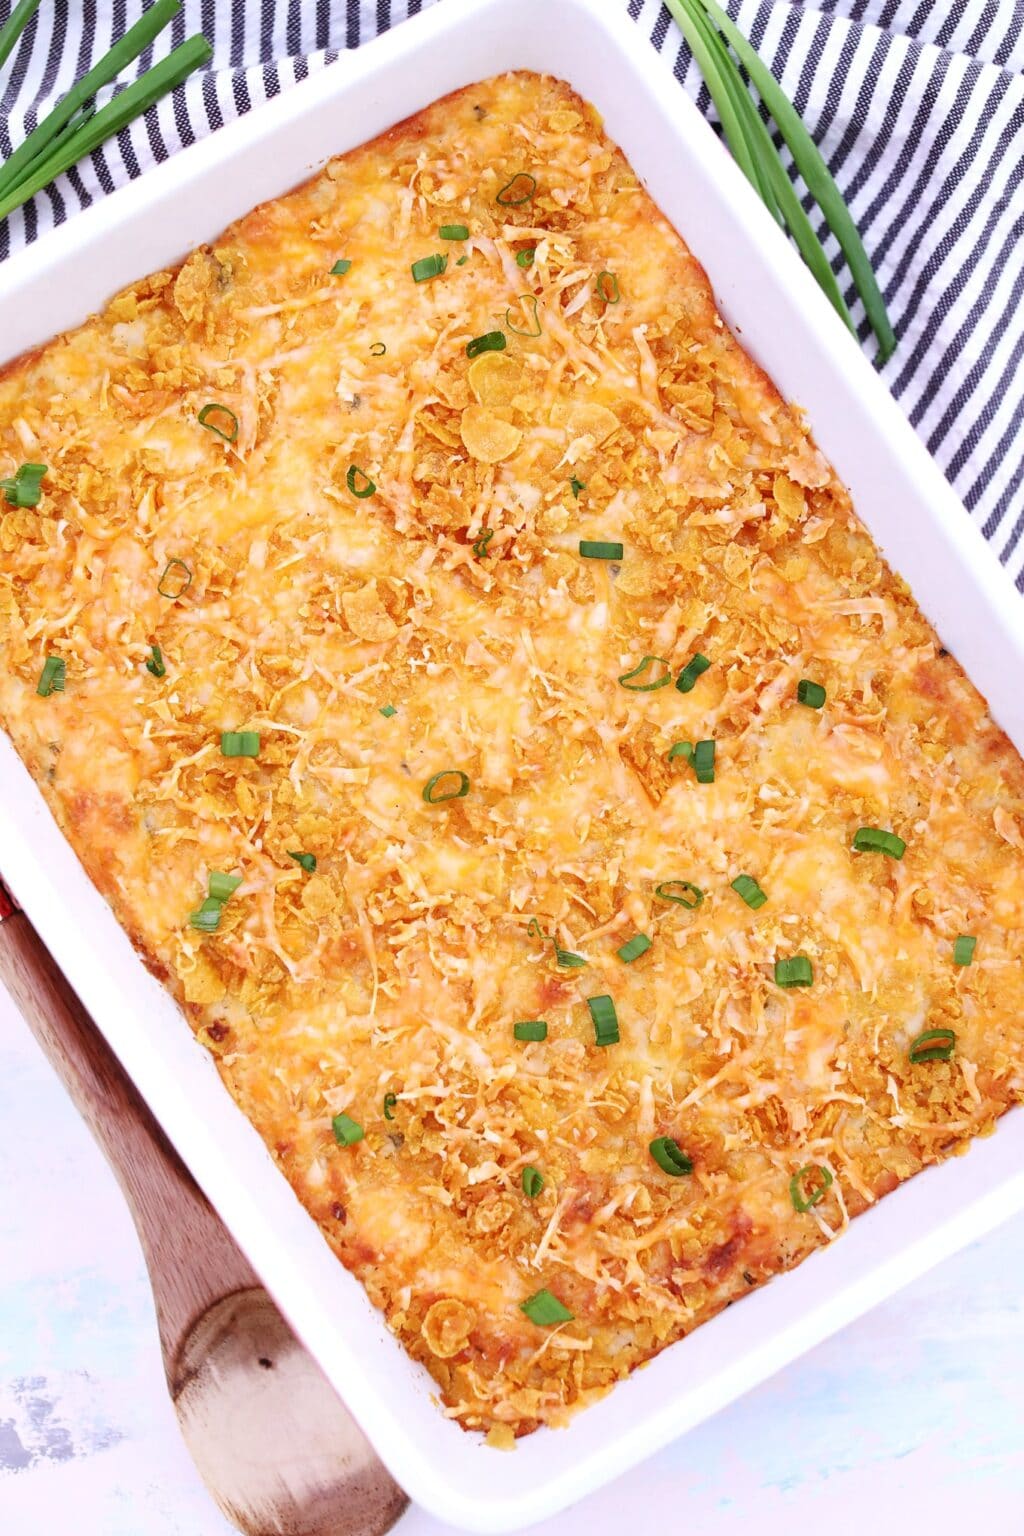 The Best Cheesy Potatoes Recipe [video] - Sweet and Savory Meals